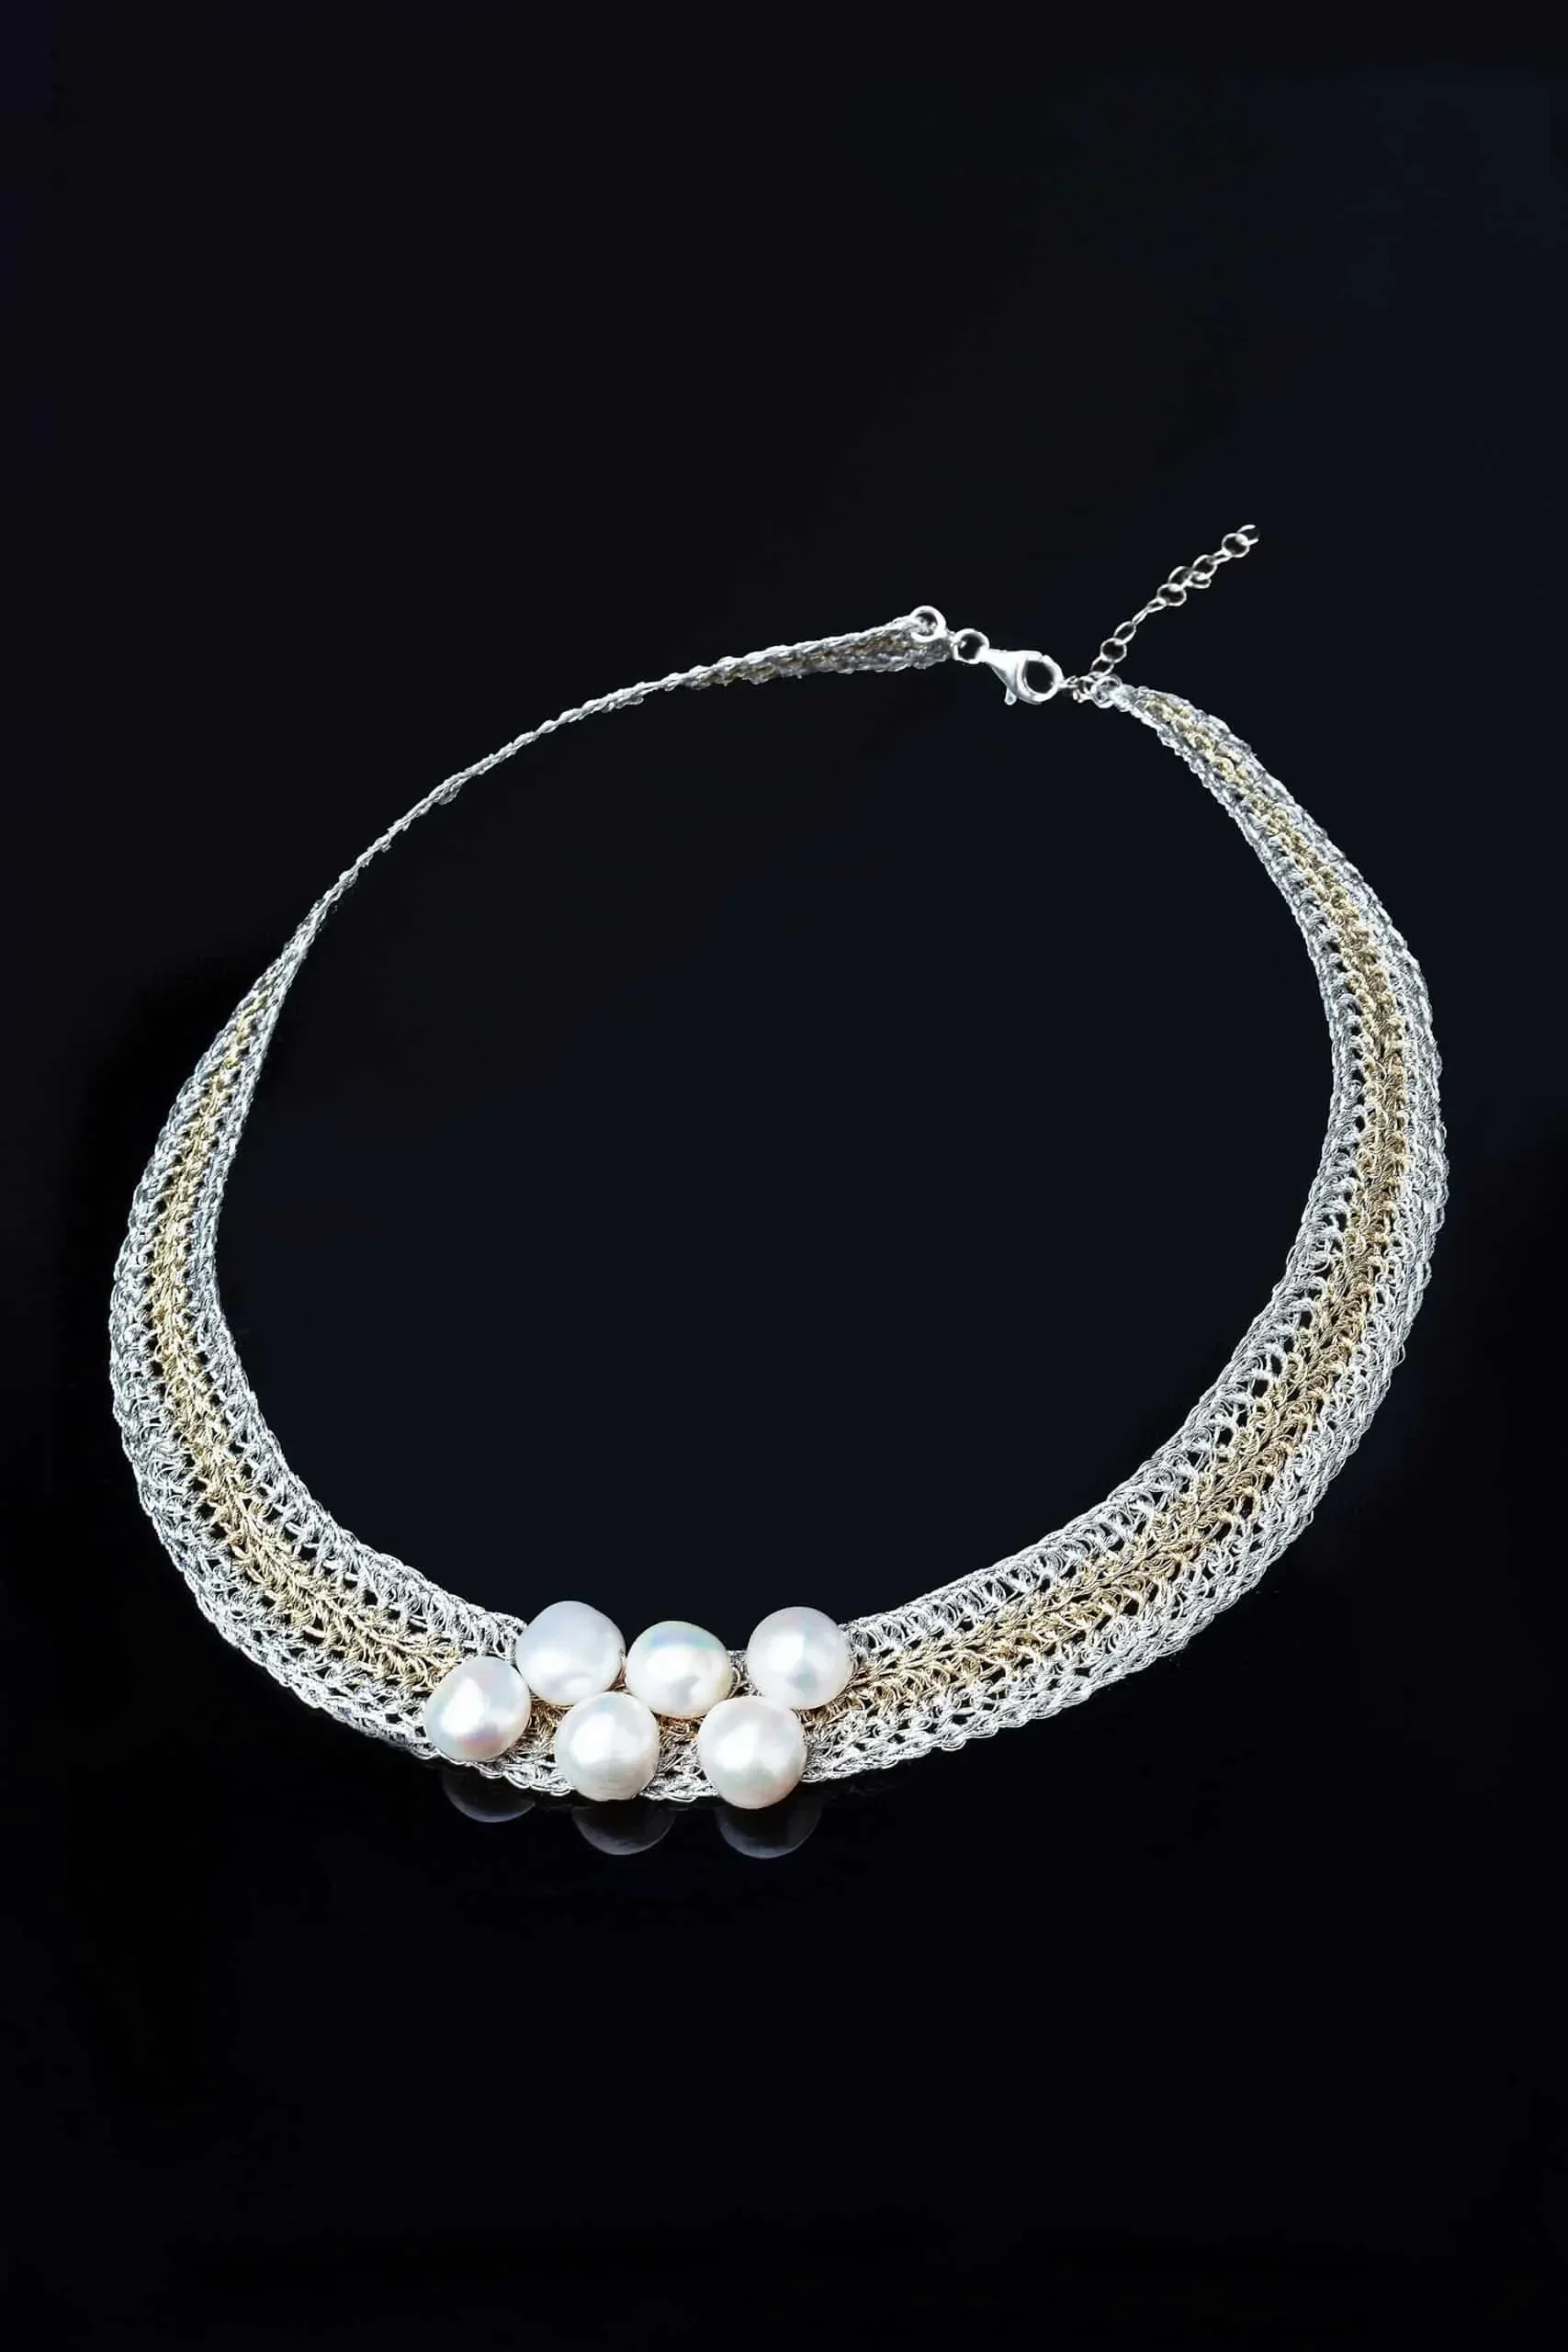 Handmade Jewellery | Crochet knit silver necklace with and pearls gallery 3